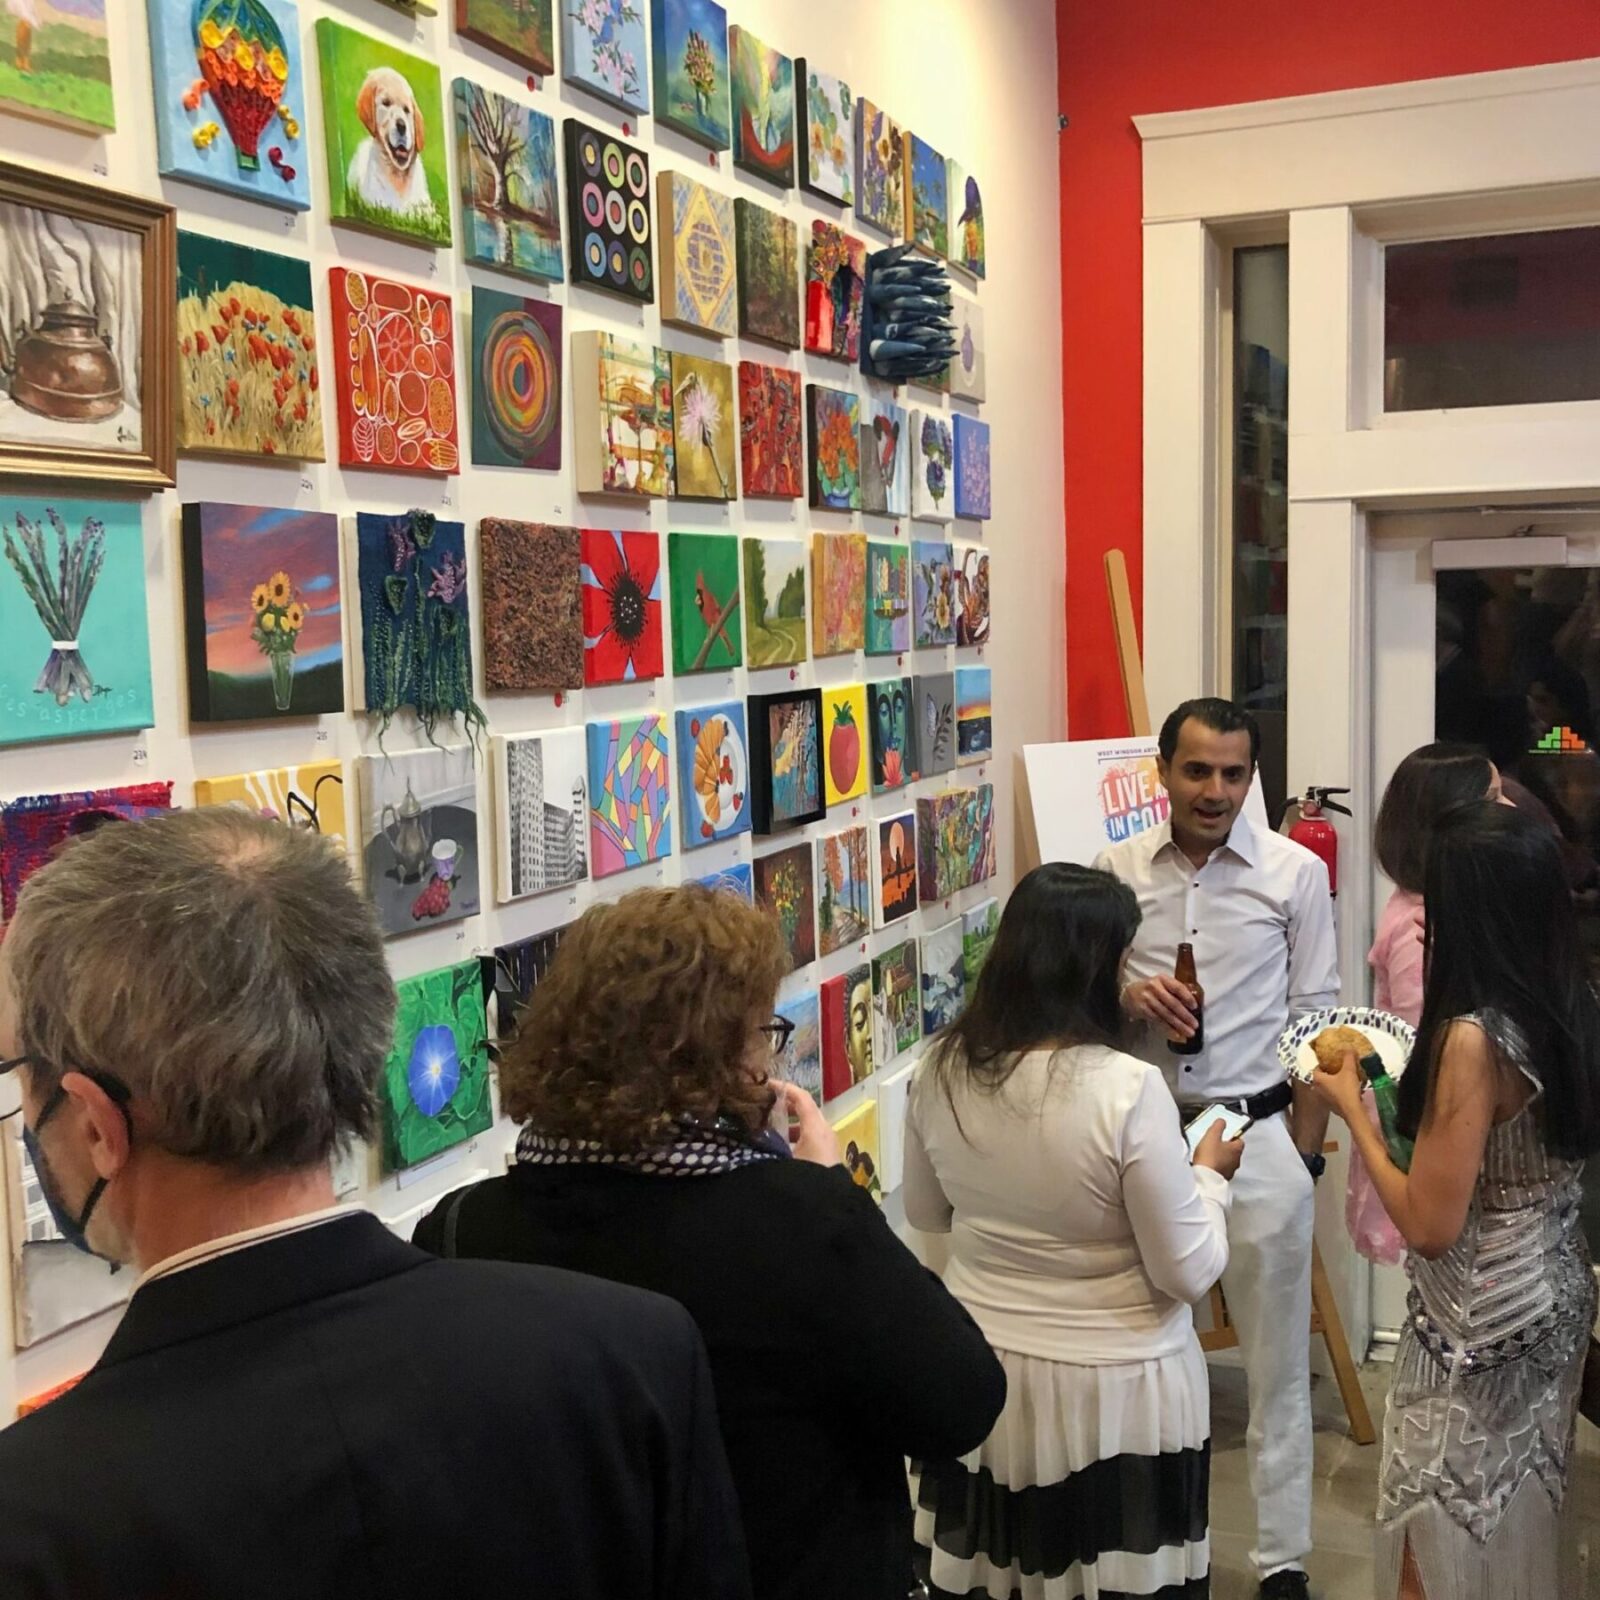 GR8 Works Fundraising Art Show, image of 8x8 works on art on the wall, with people in the foreground